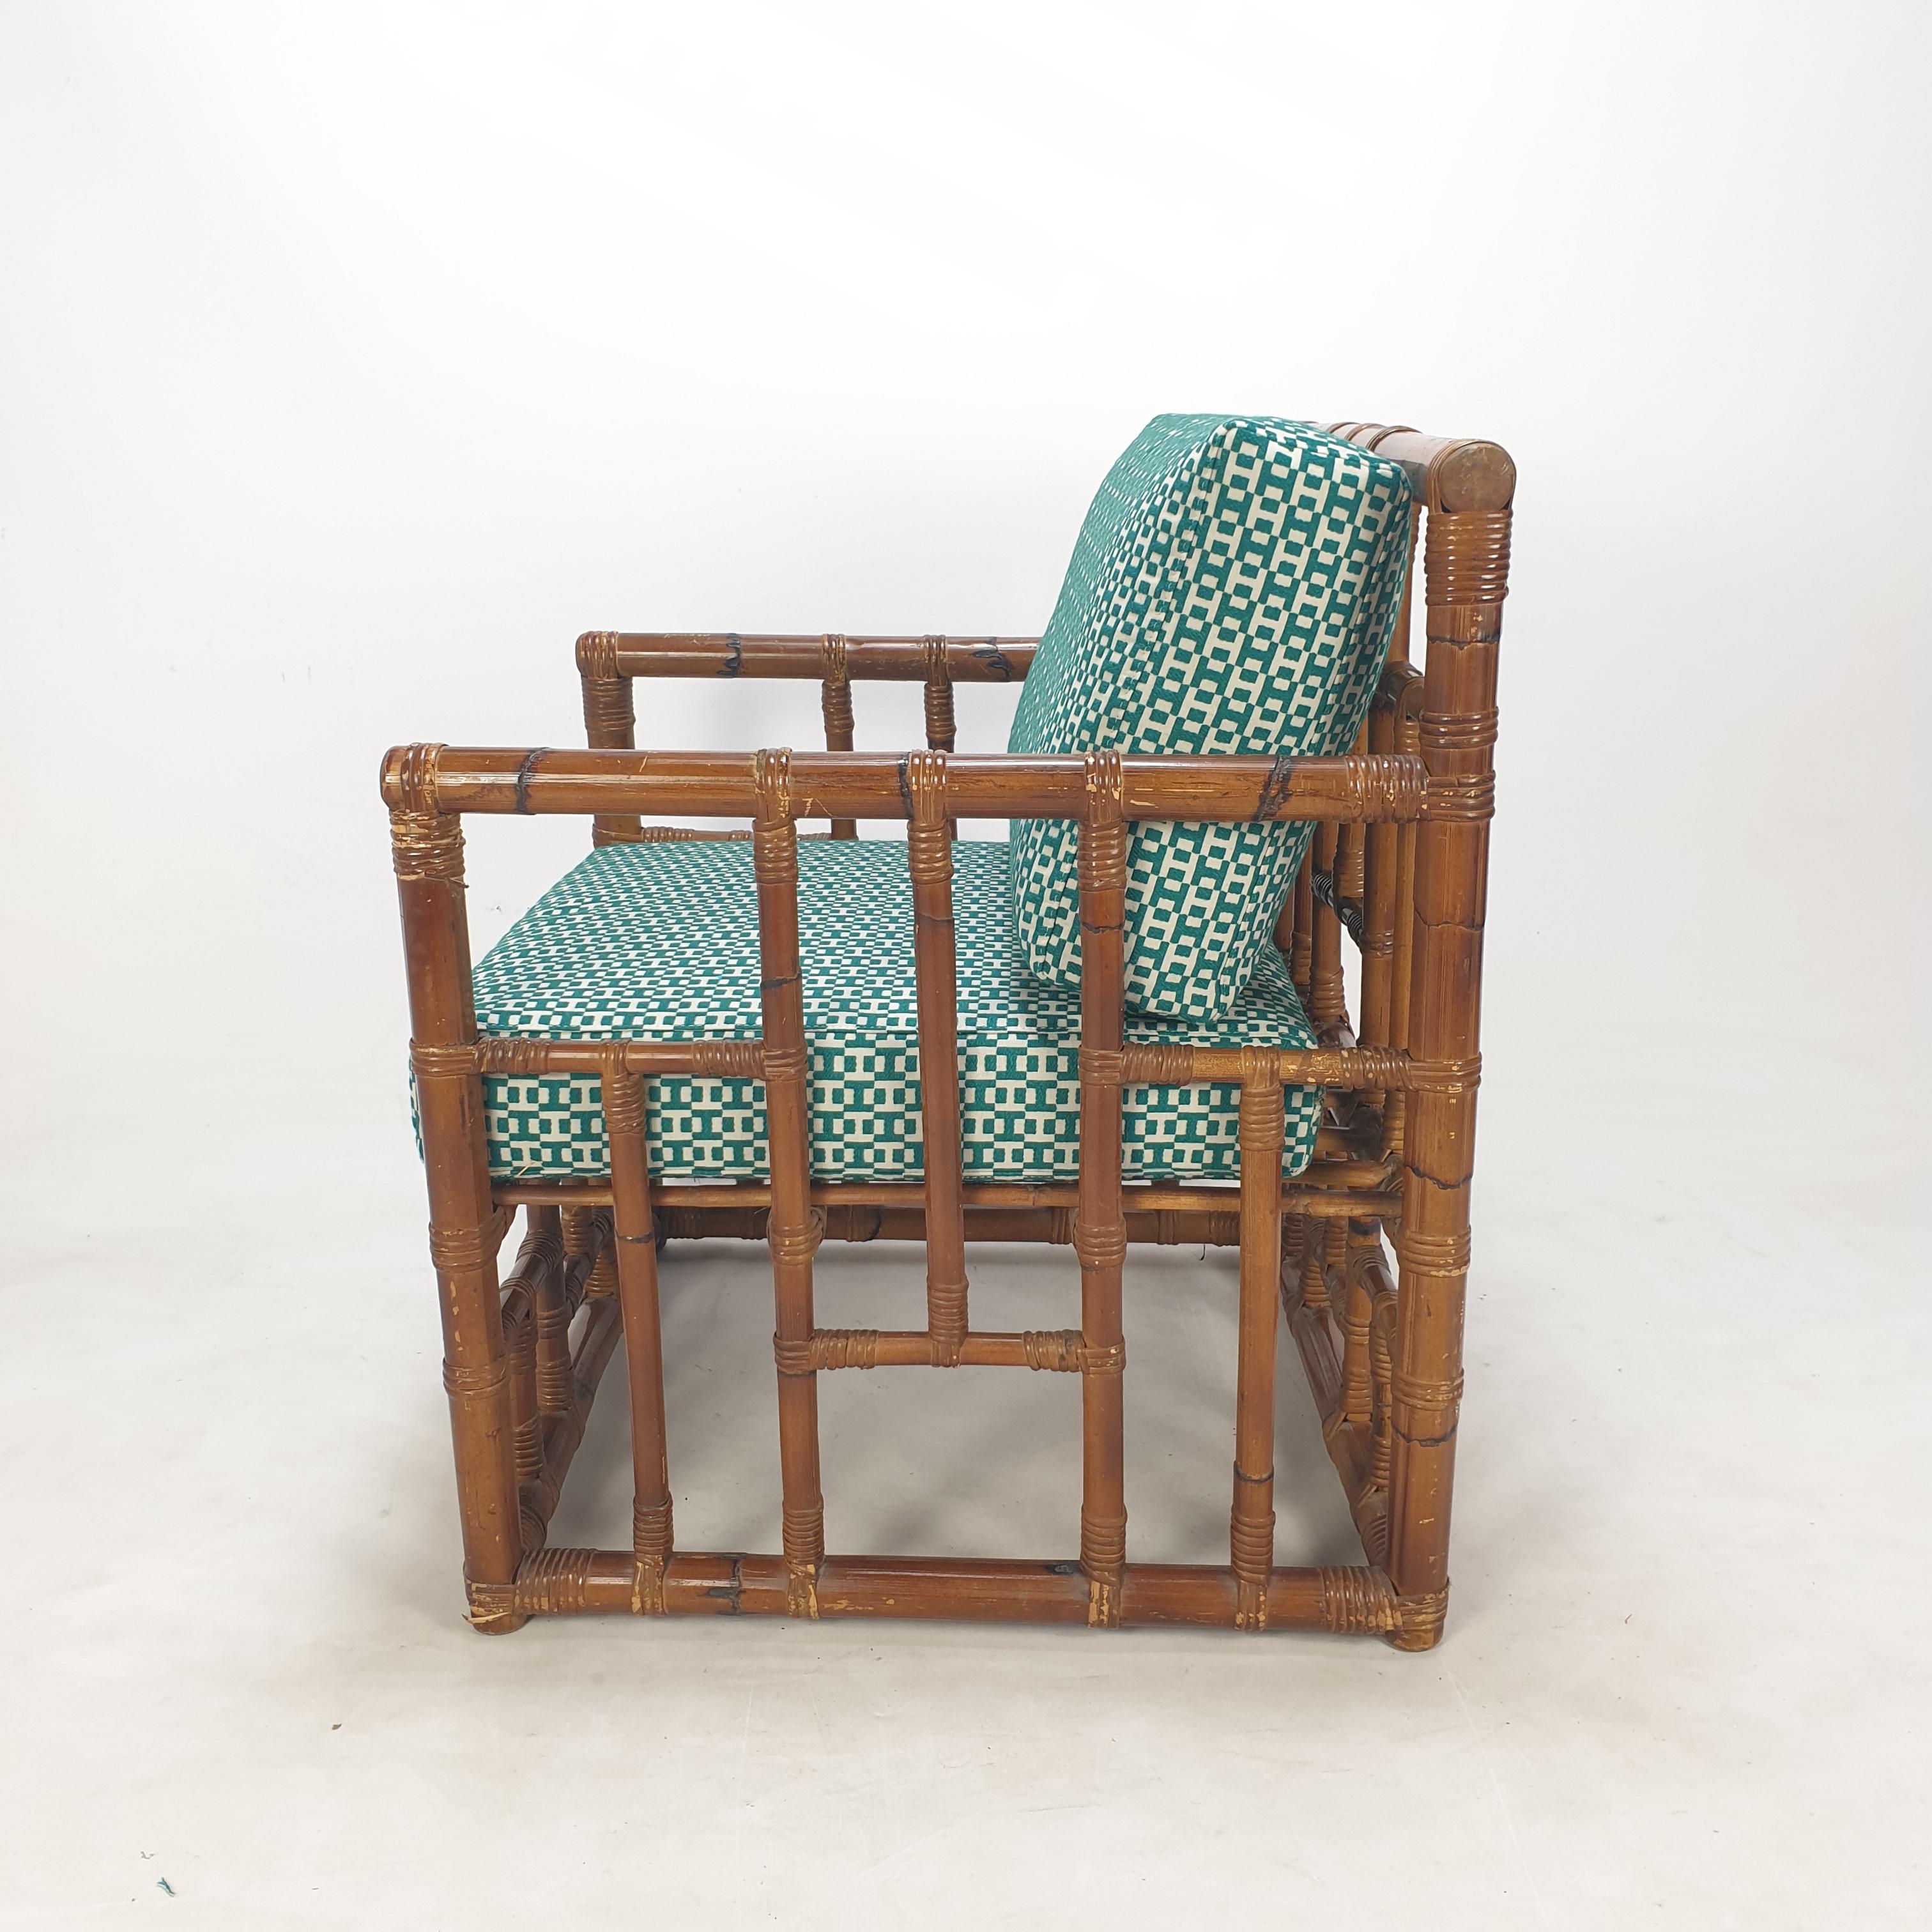 Pair of Italian Bamboo Lounge Chairs with Hermès Upholstery, 1970's For Sale 1